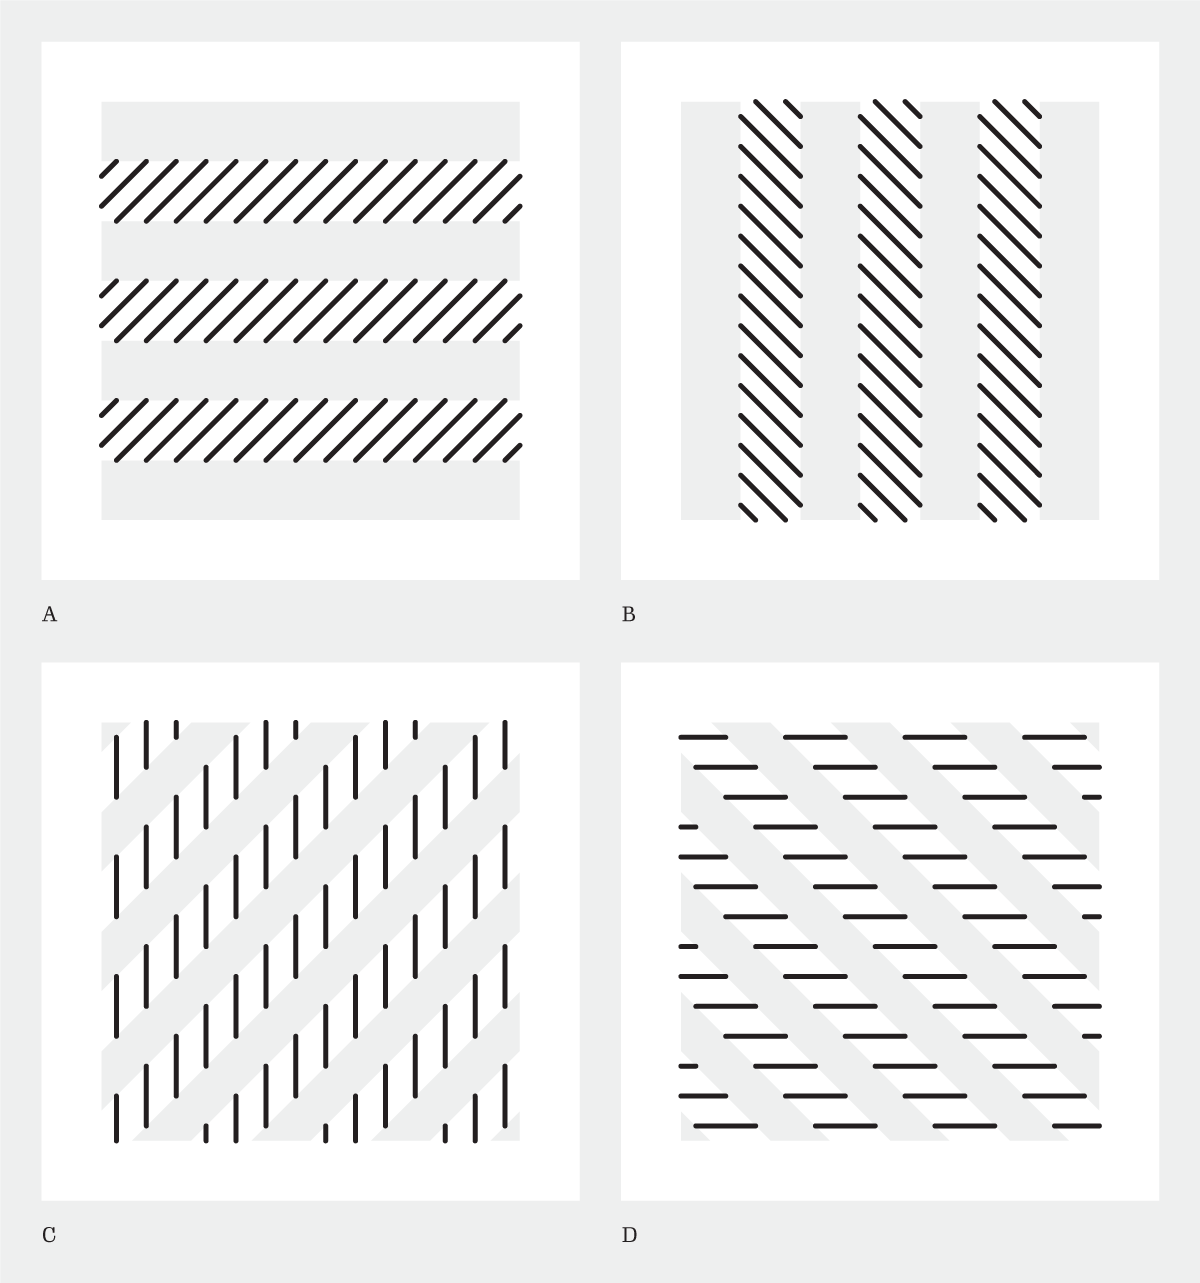 A series of four square white cards, each labelled with a letter. Each has stripes cut out of it and black stripes printed on it. A: Horizontal stripes cut out, diagonal black stripes from top right to bottom left printed. B: Vertical stripes cut out, diagonal black stripes from top left to bottom right printed. C: Diagonal stripes from top right to bottom left cut out, black vertical stripes printed. D: Diagonal stripes from top left to bottom right cut out, horizontal black stripes printed.